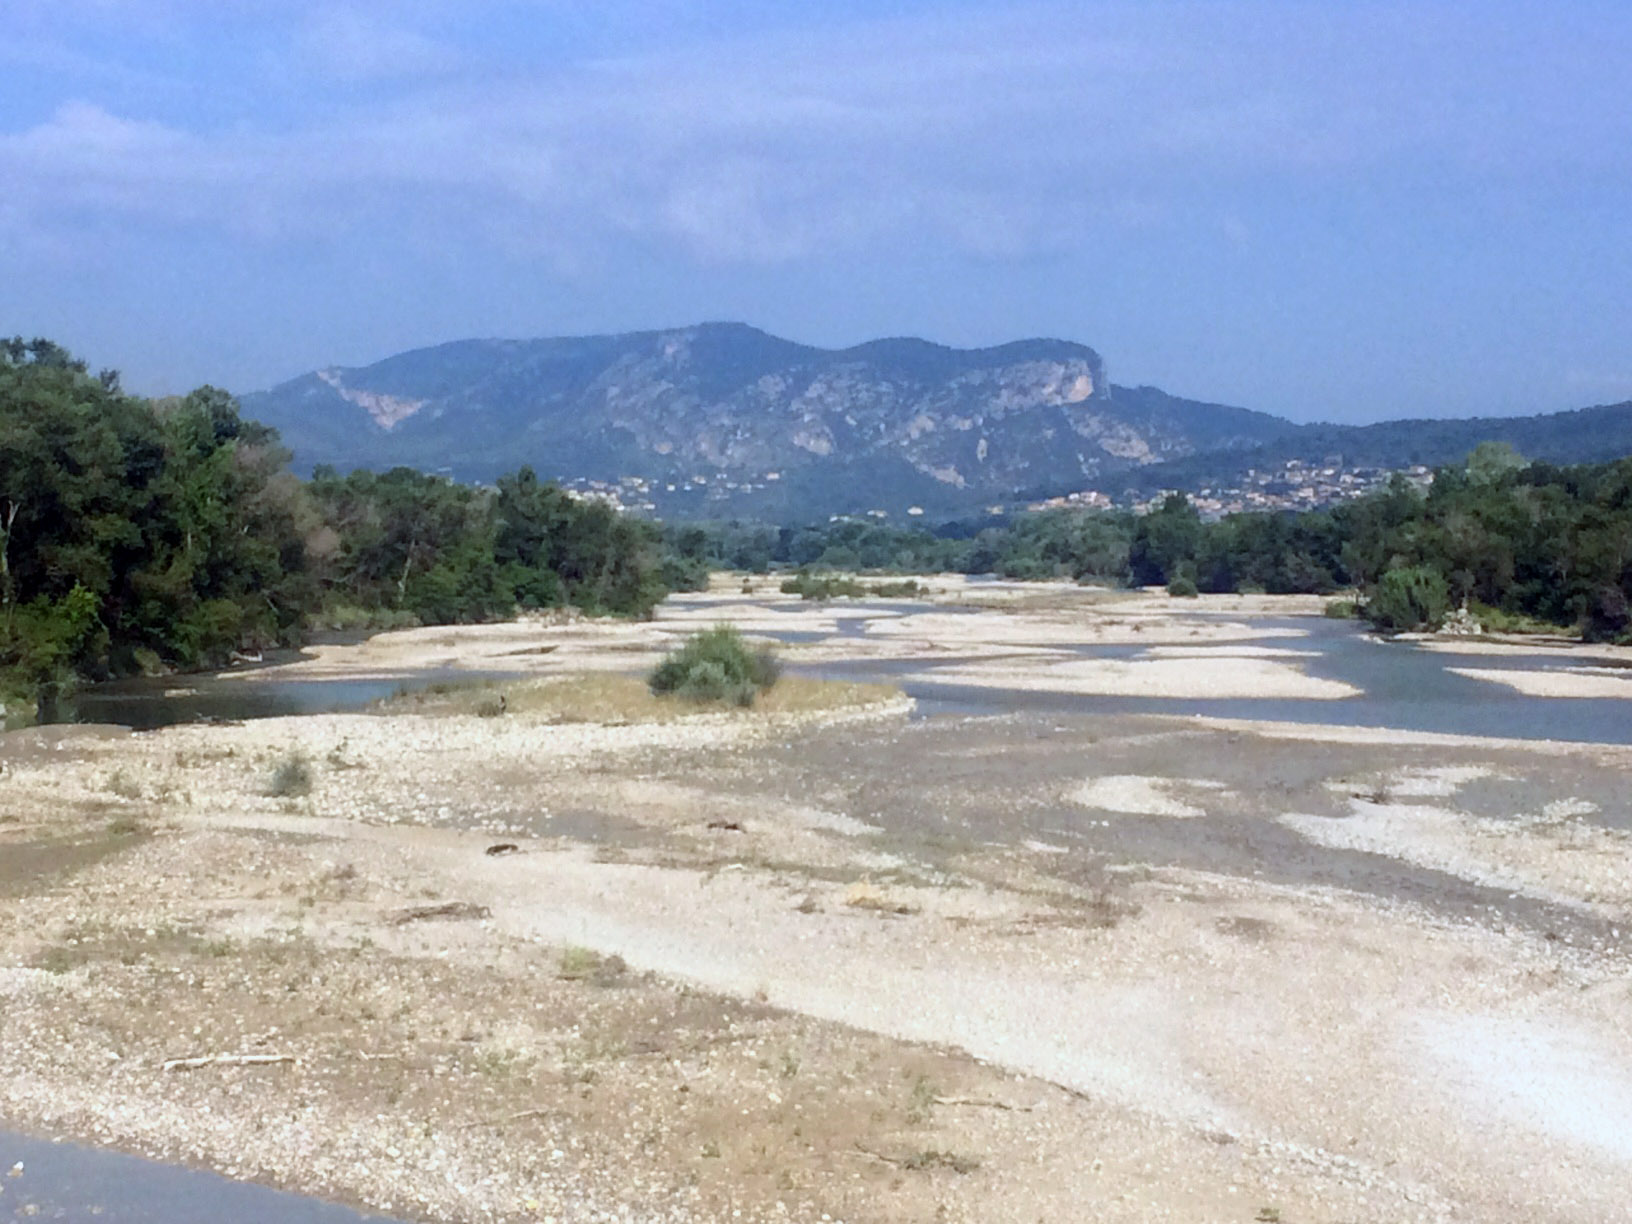 Dry river bed of the Durance